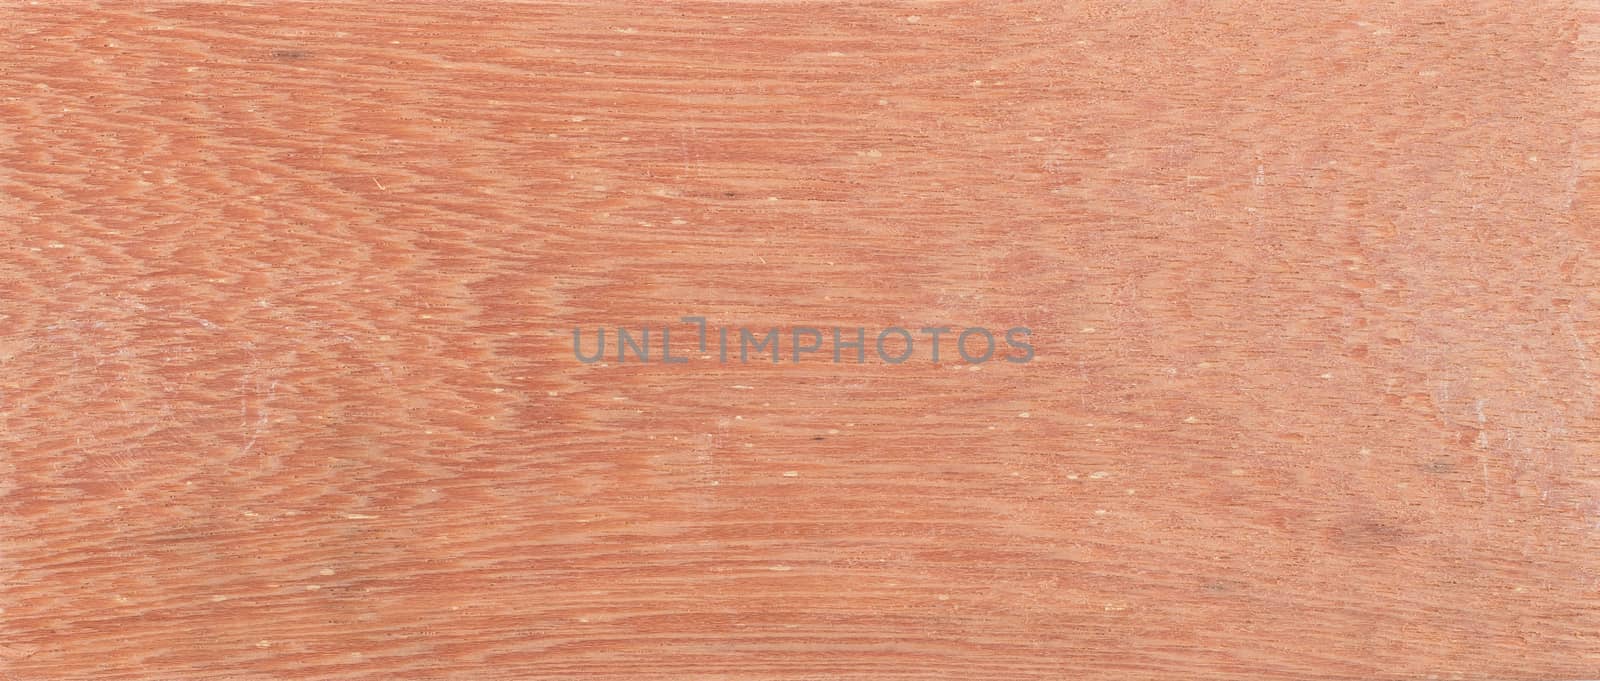 Wood background - Wood from the tropical rainforest - Suriname - Symphonia globulifera